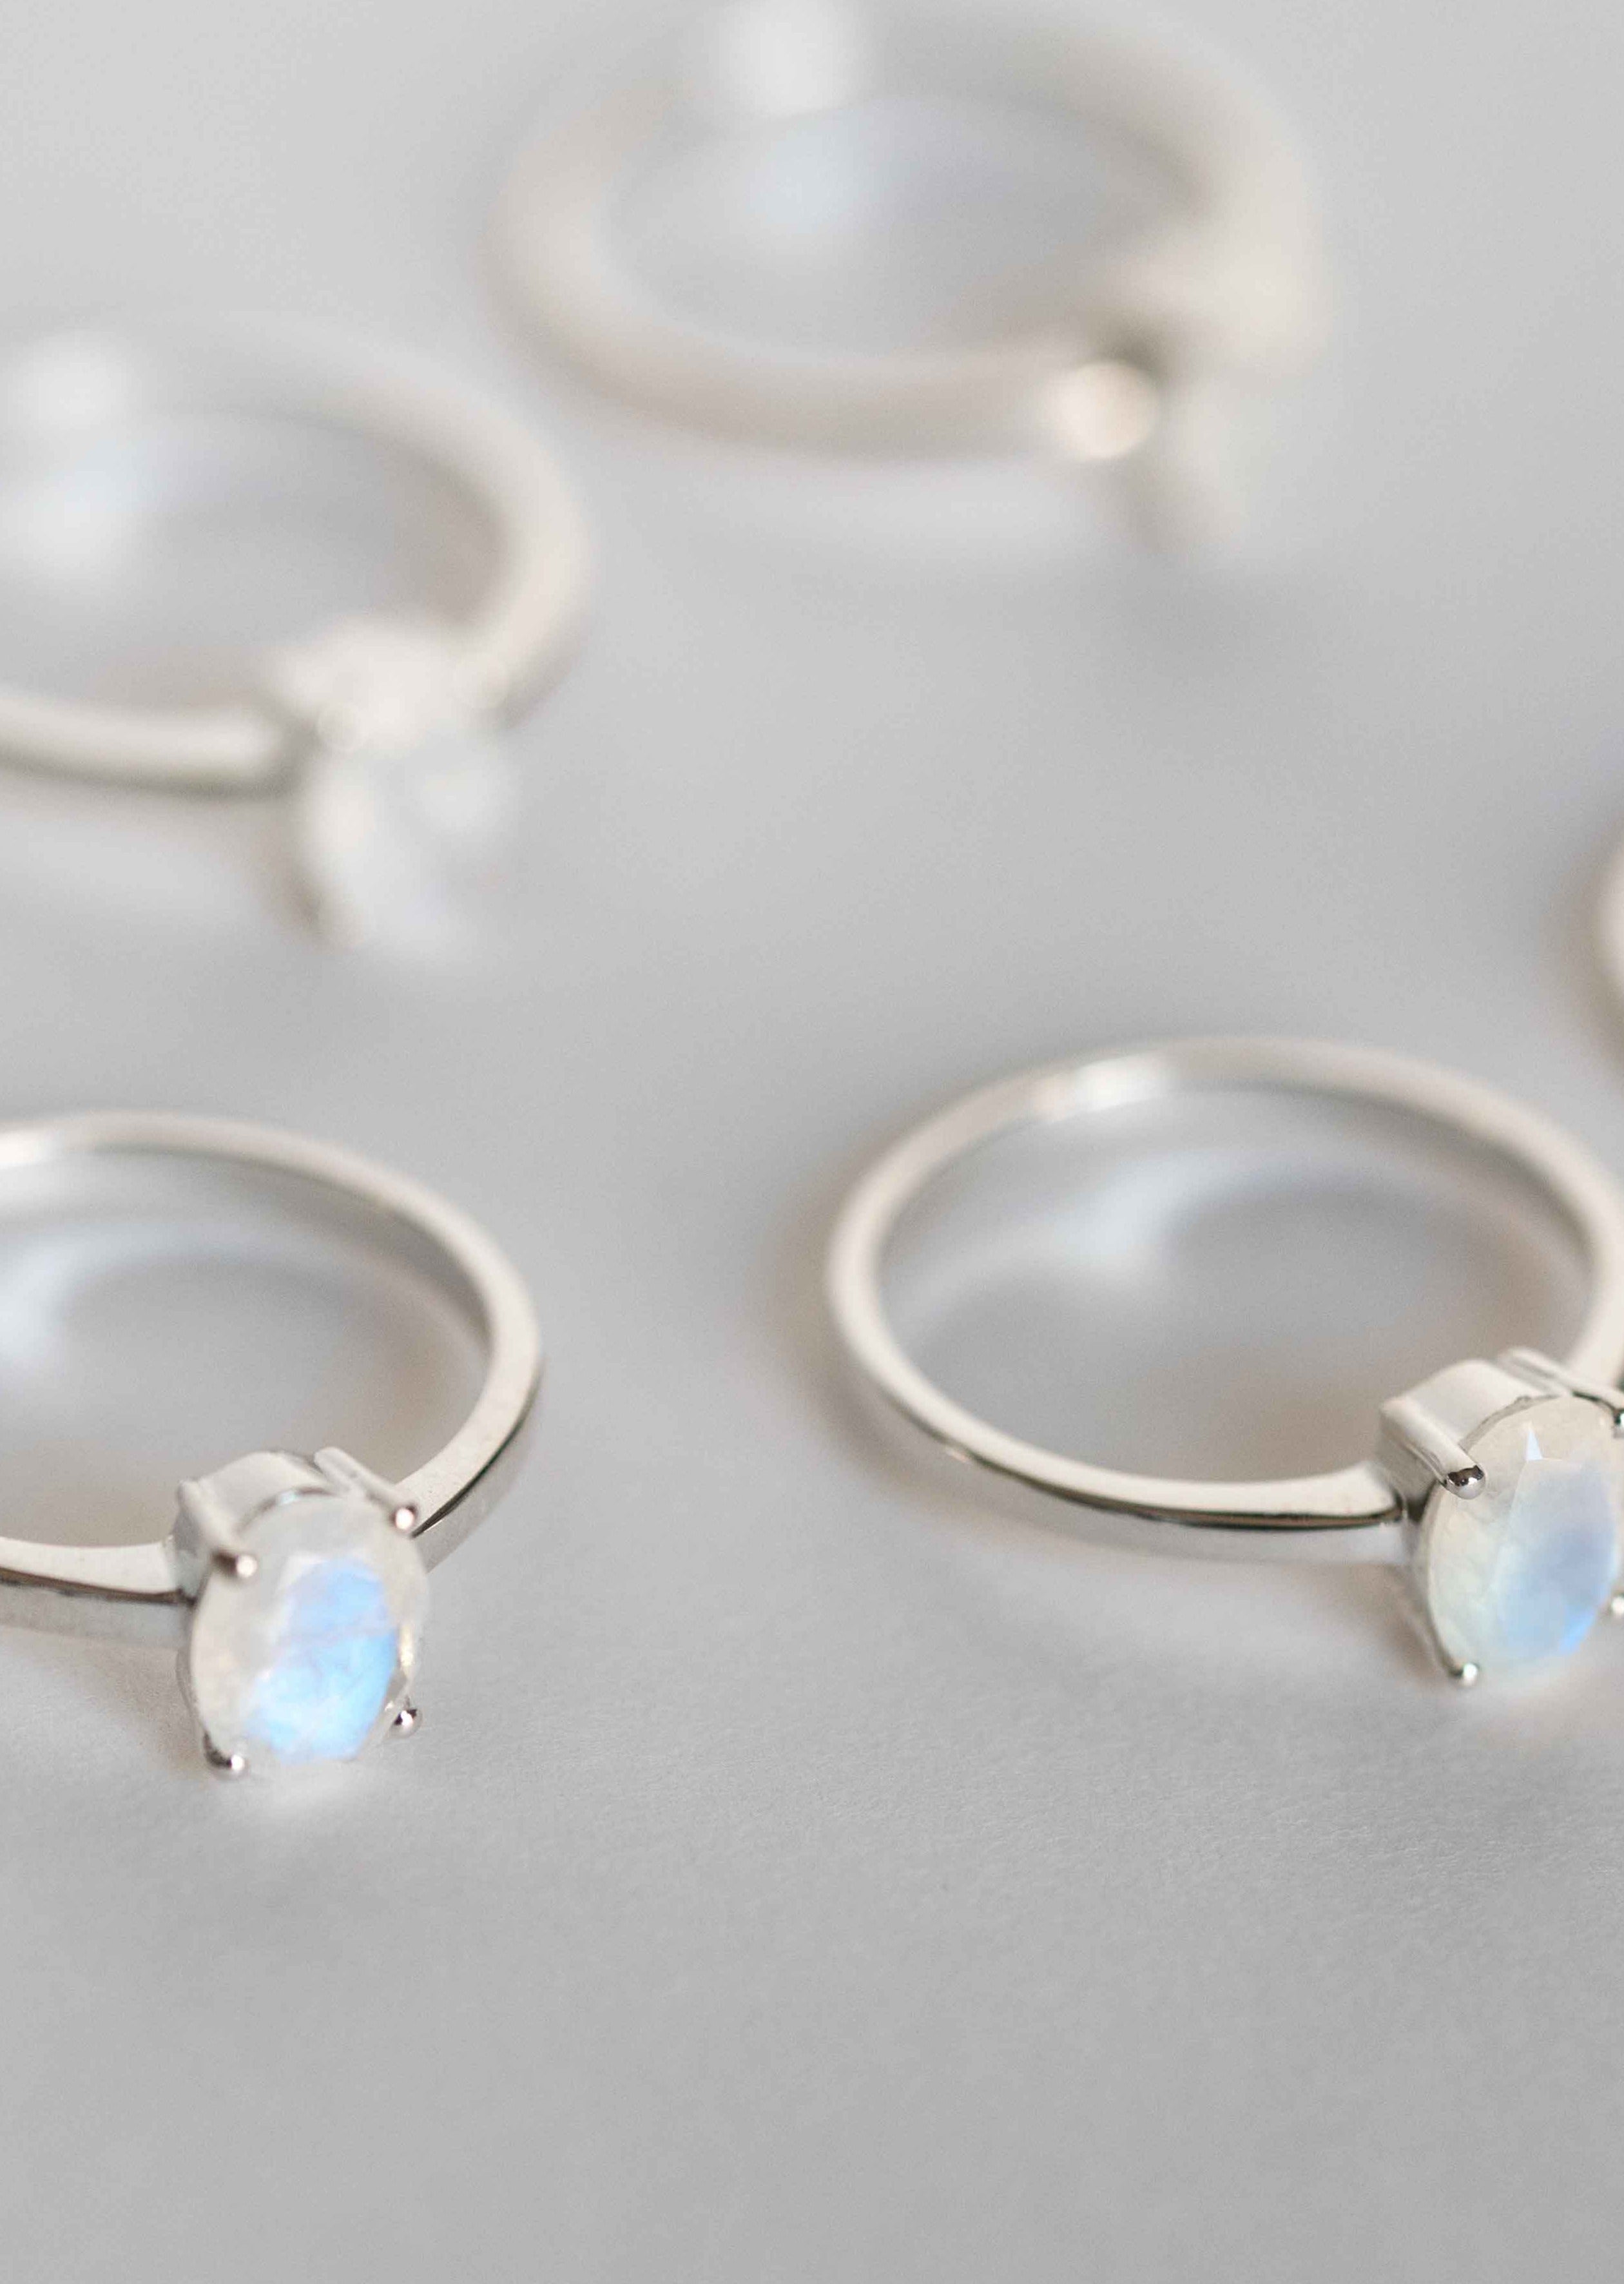 Moonstone Sterling Silver 925 Rings for Women Best gifts